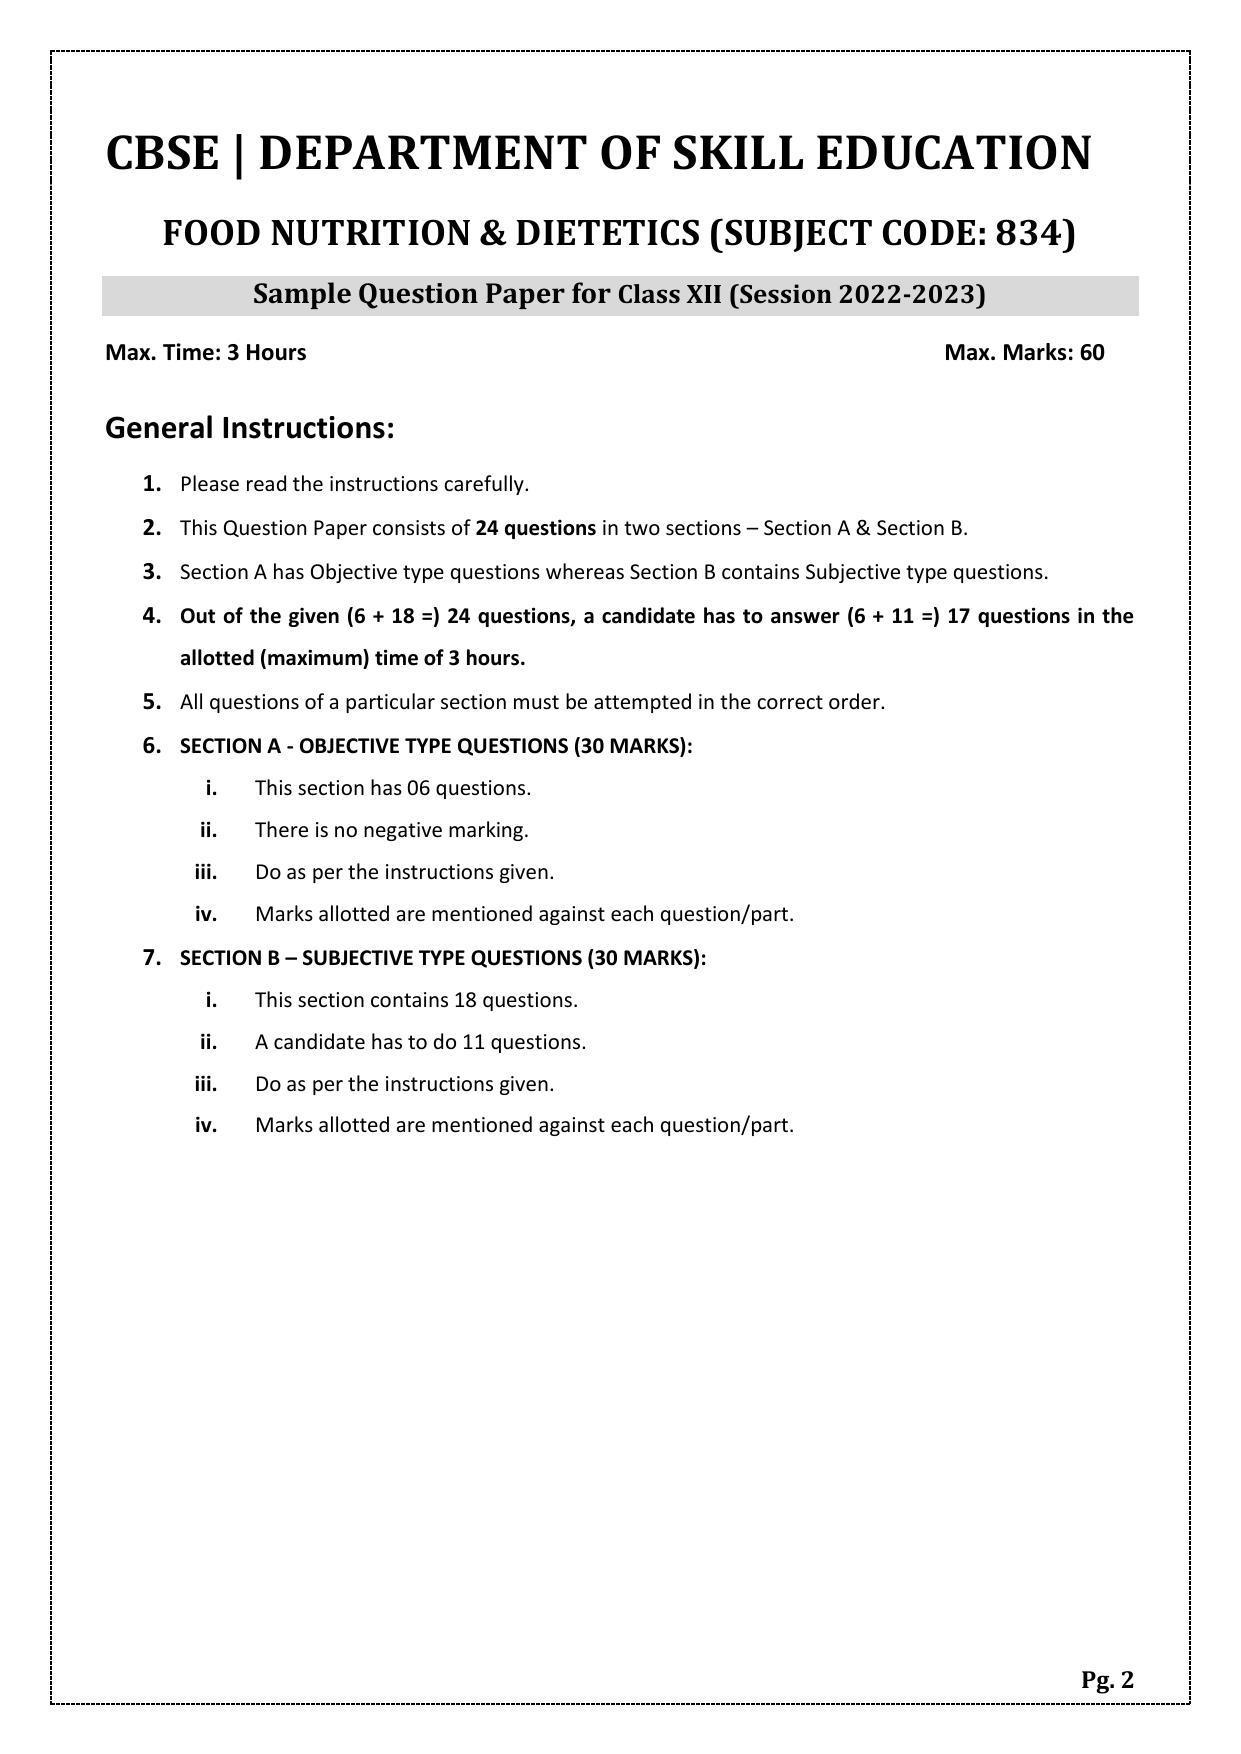 CBSE Class 12 Food Nutrition & Dietetics (Skill Education) Sample Papers 2023 - Page 2